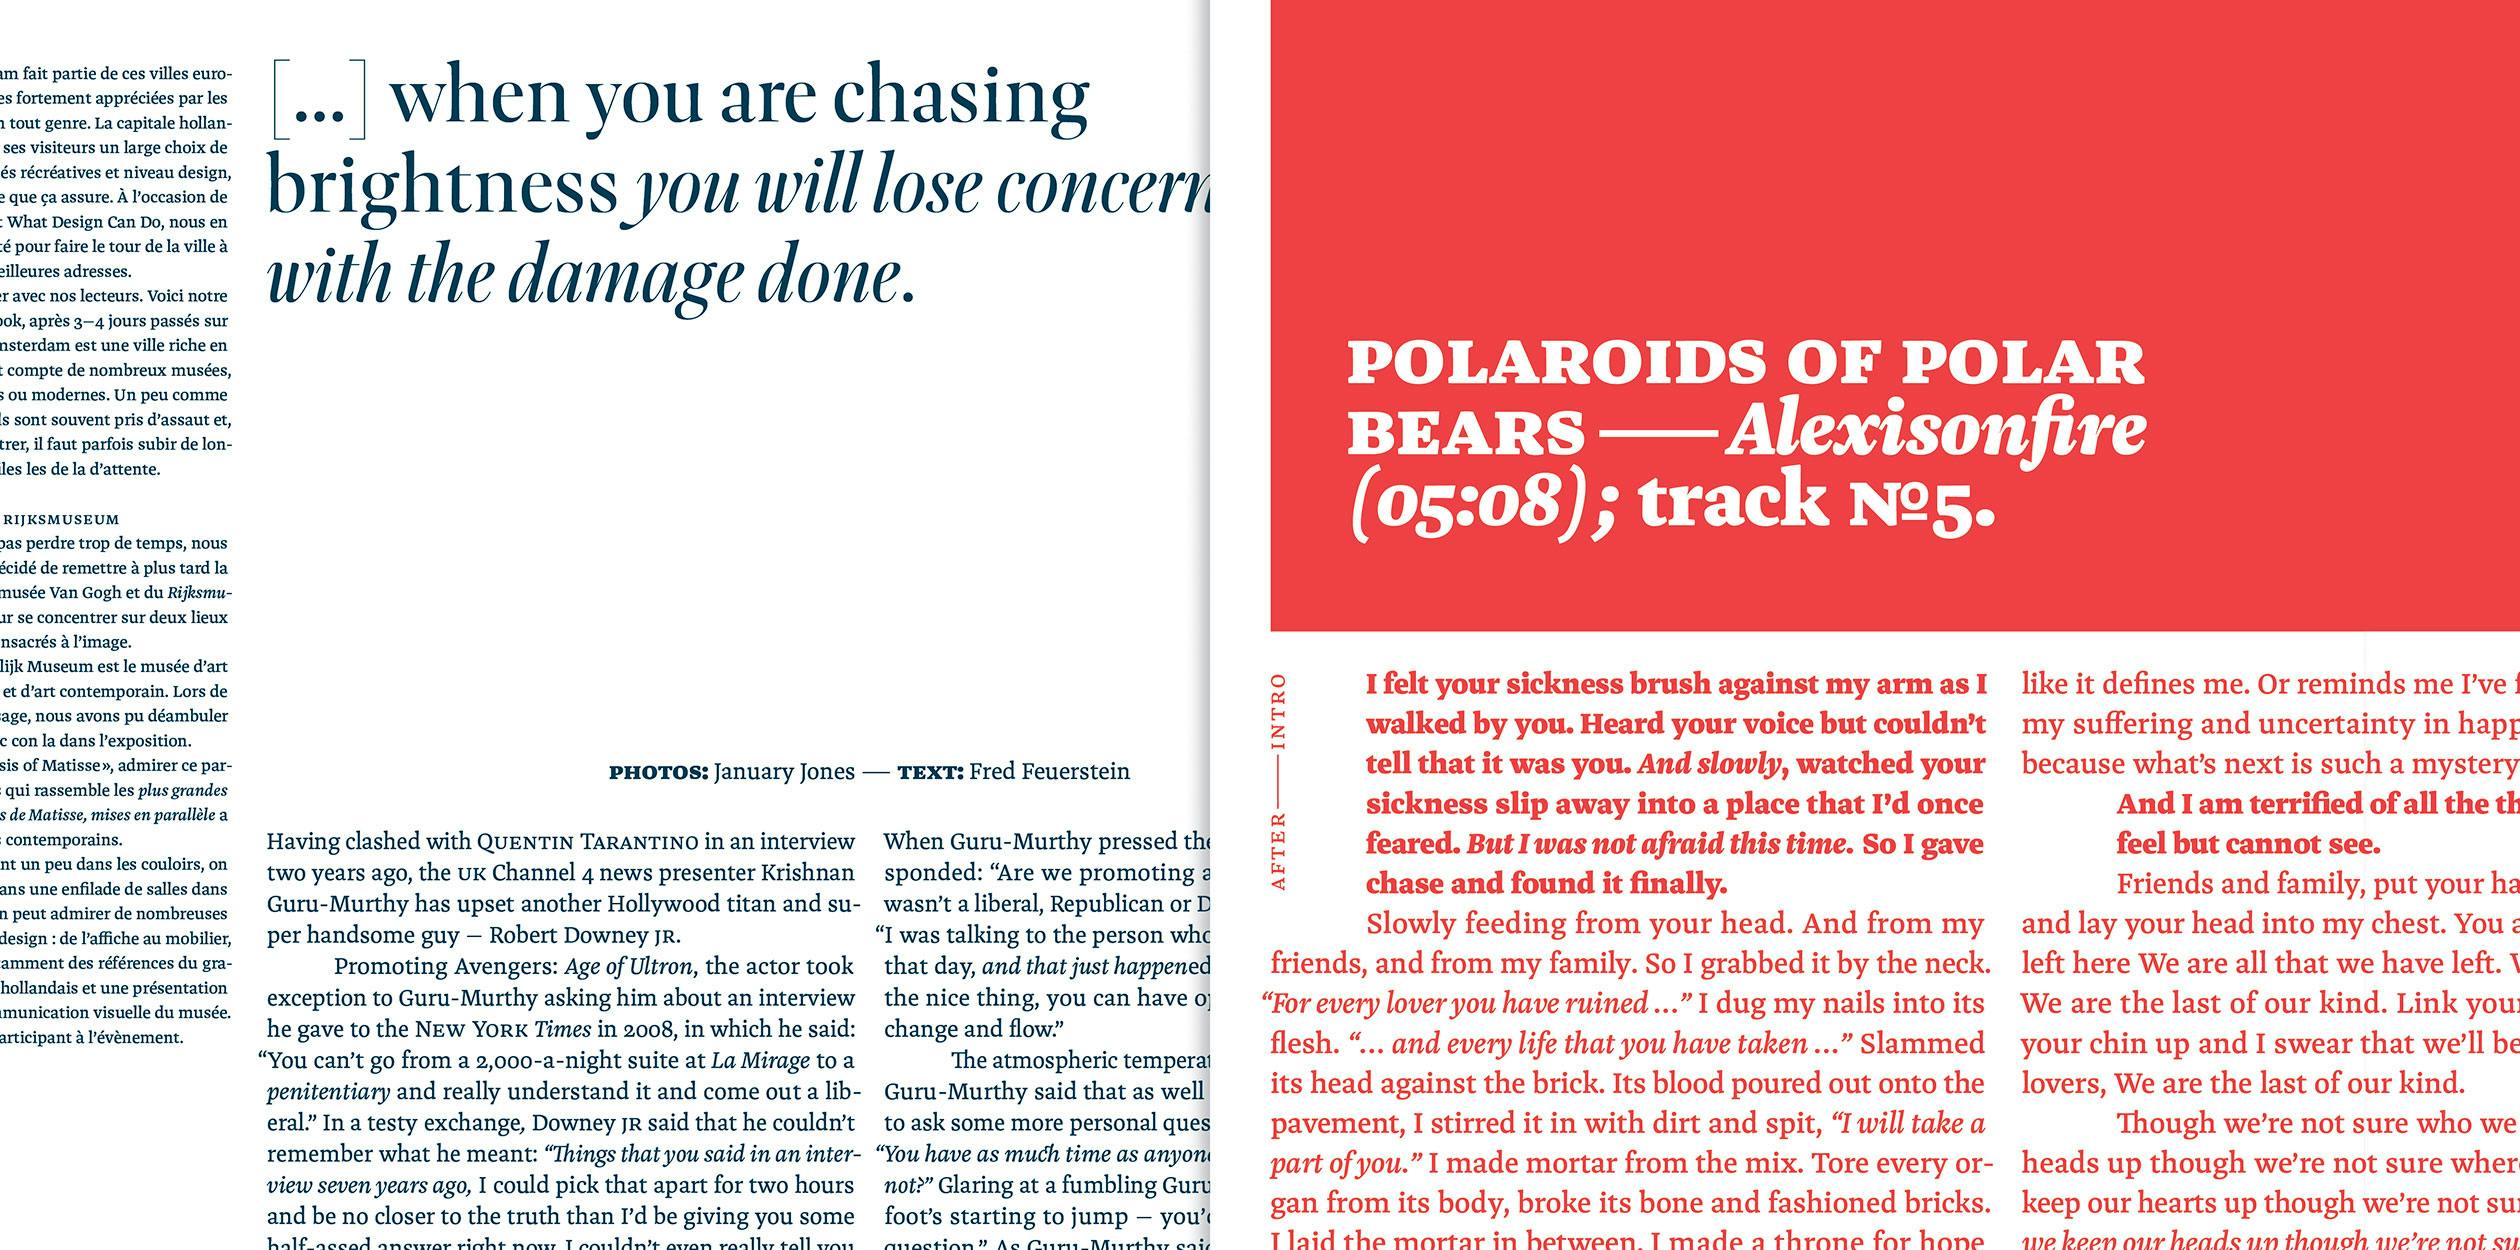 Image of Elma & Frederick typeface project from Philipp Beatrix Neumeyer